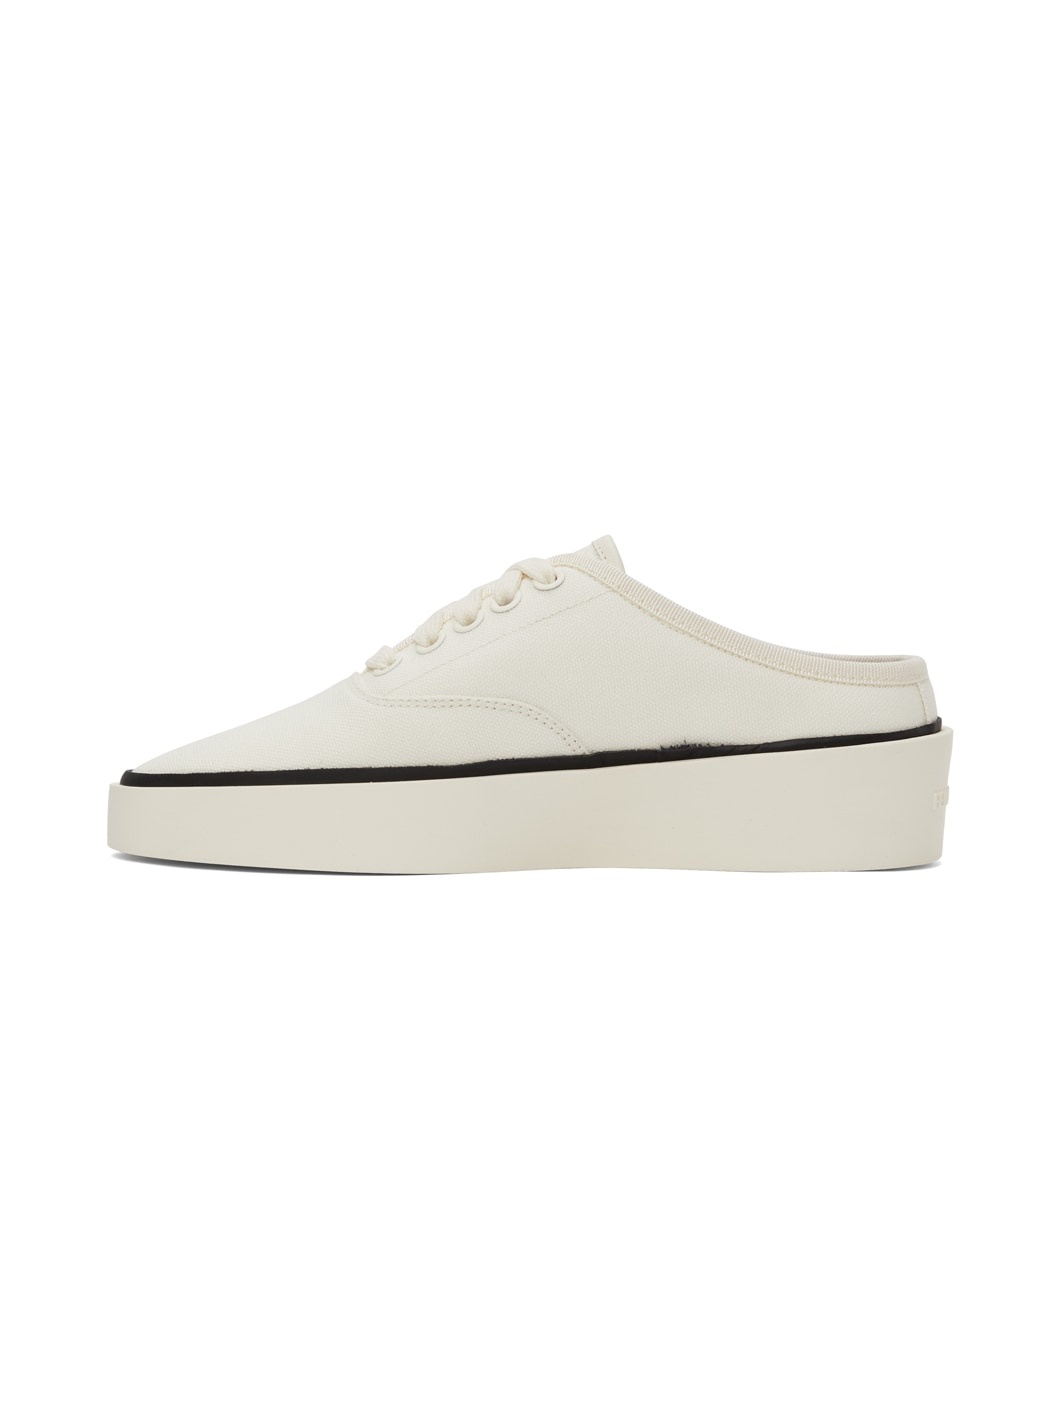 White Canvas 101 Backless Sneakers - 3